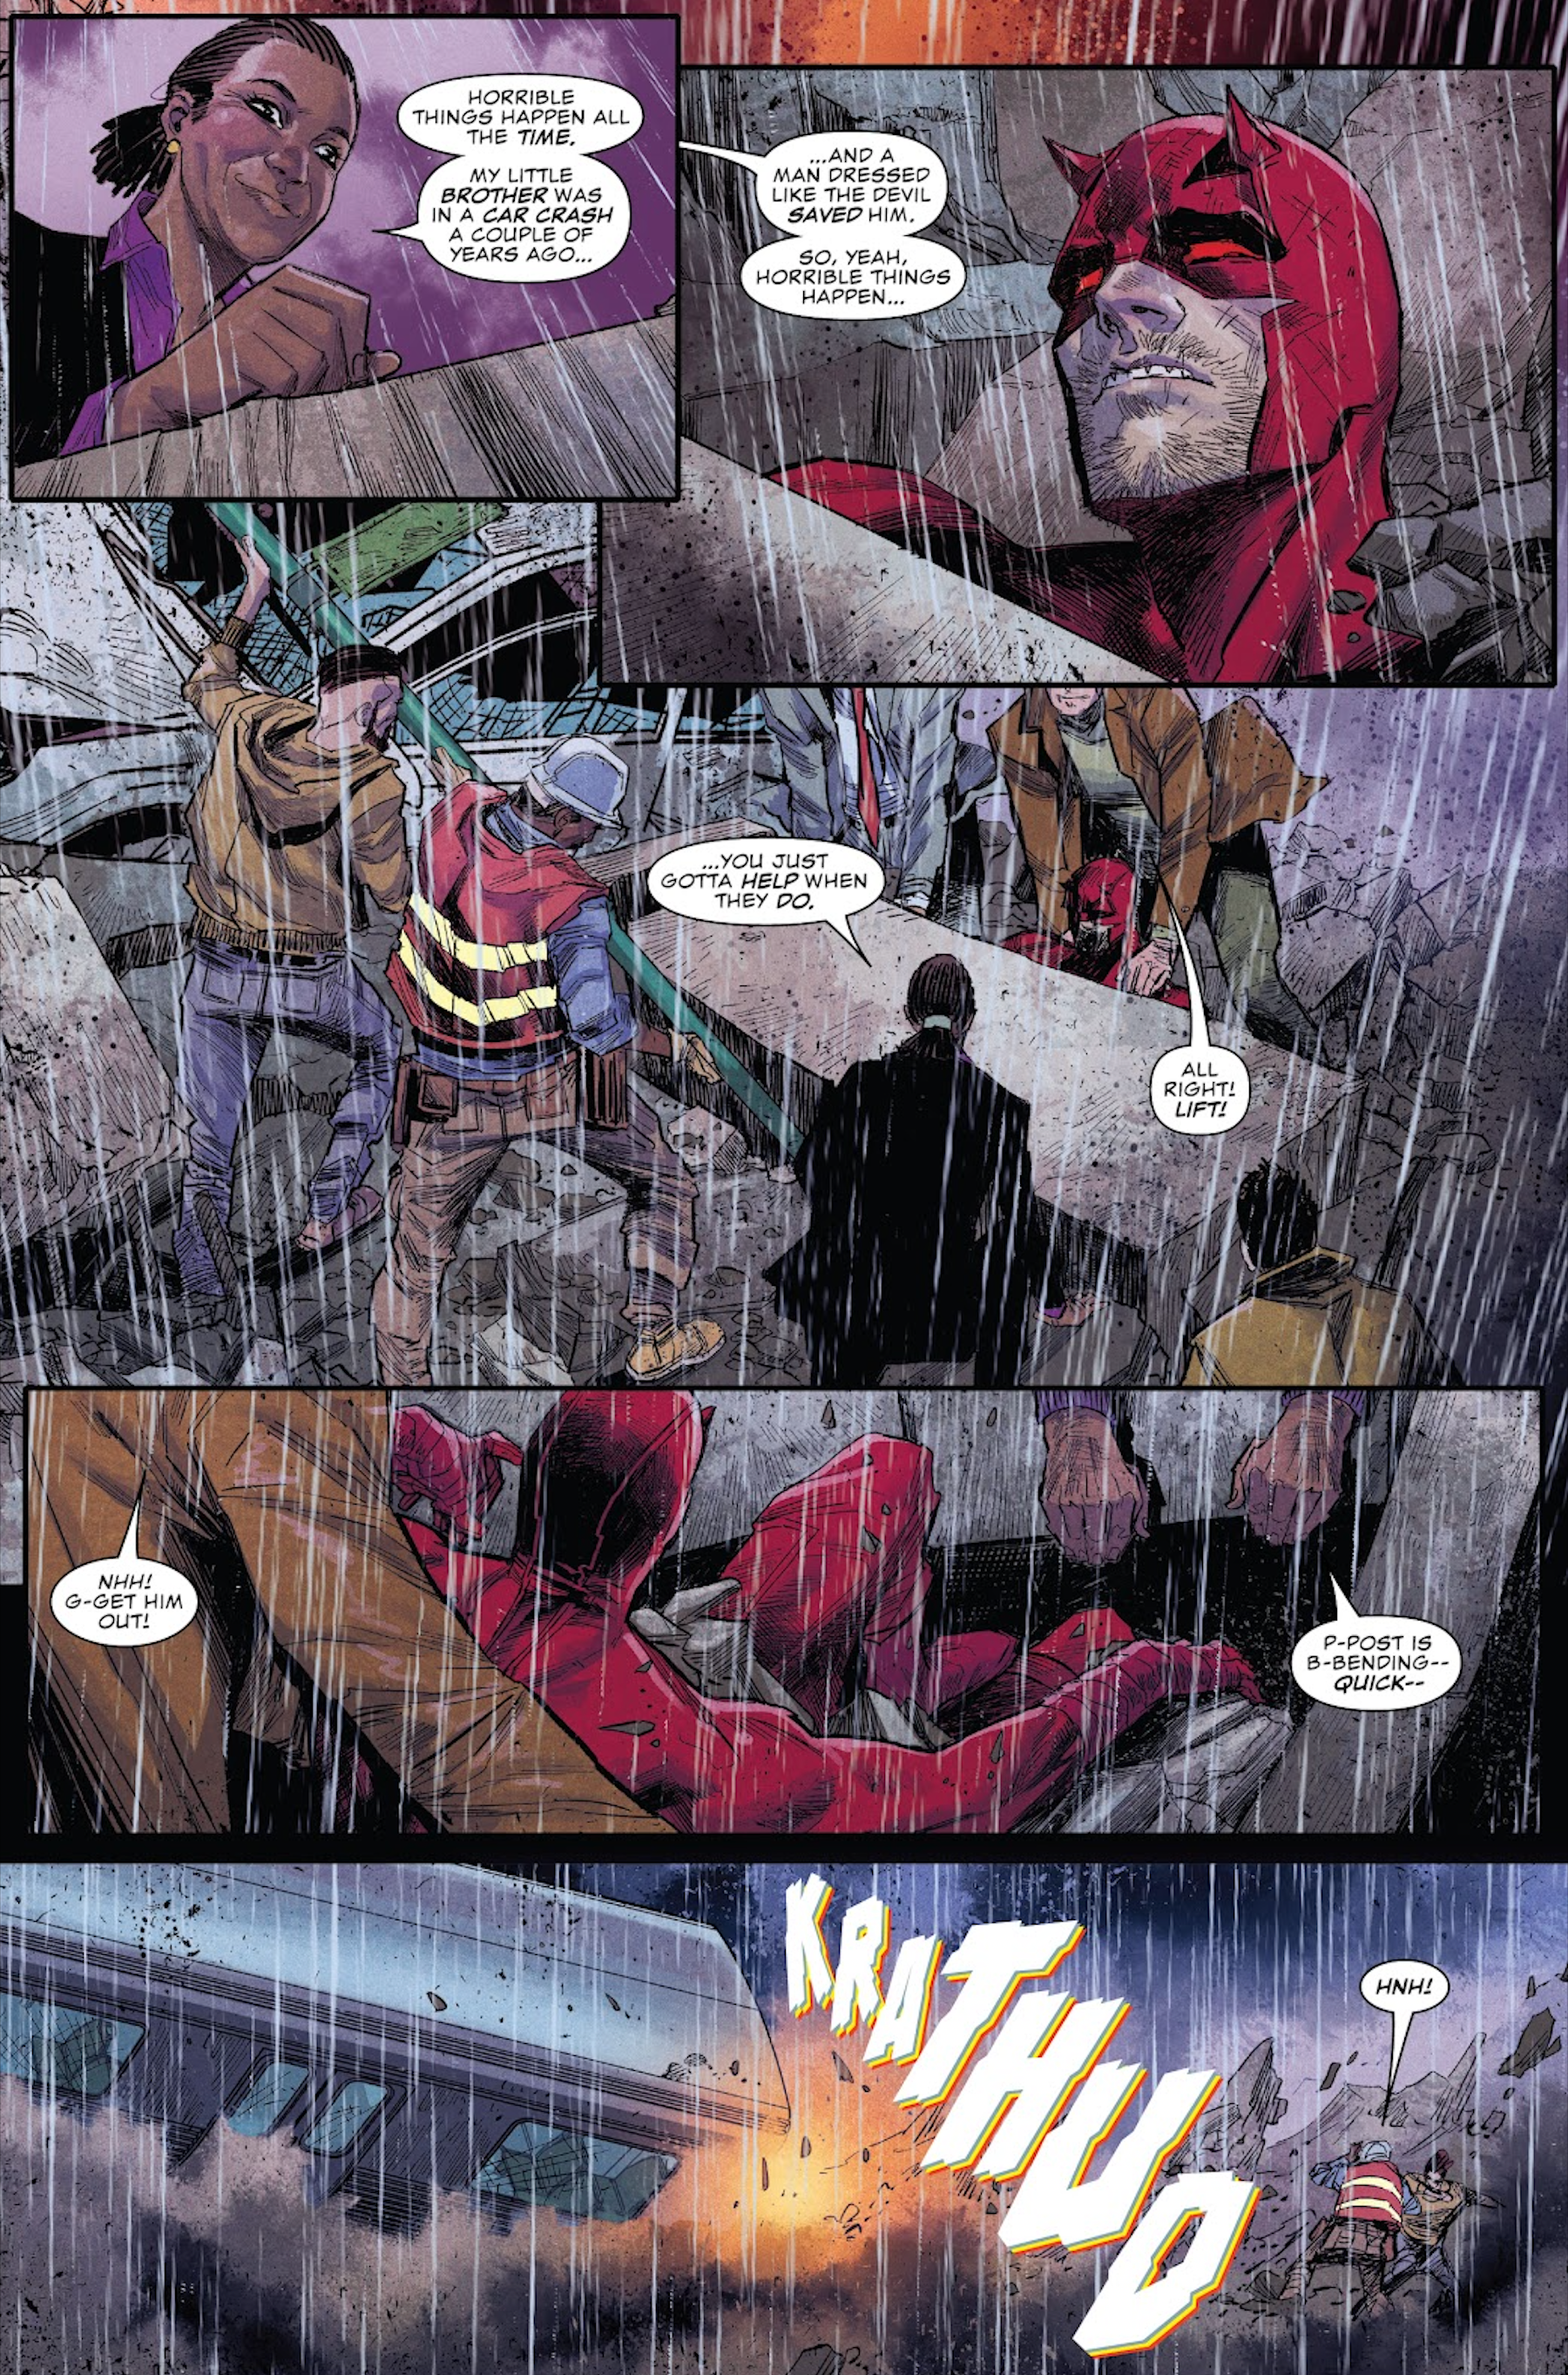 Daredevil Finally Gets His Spider-Man 2 Moment